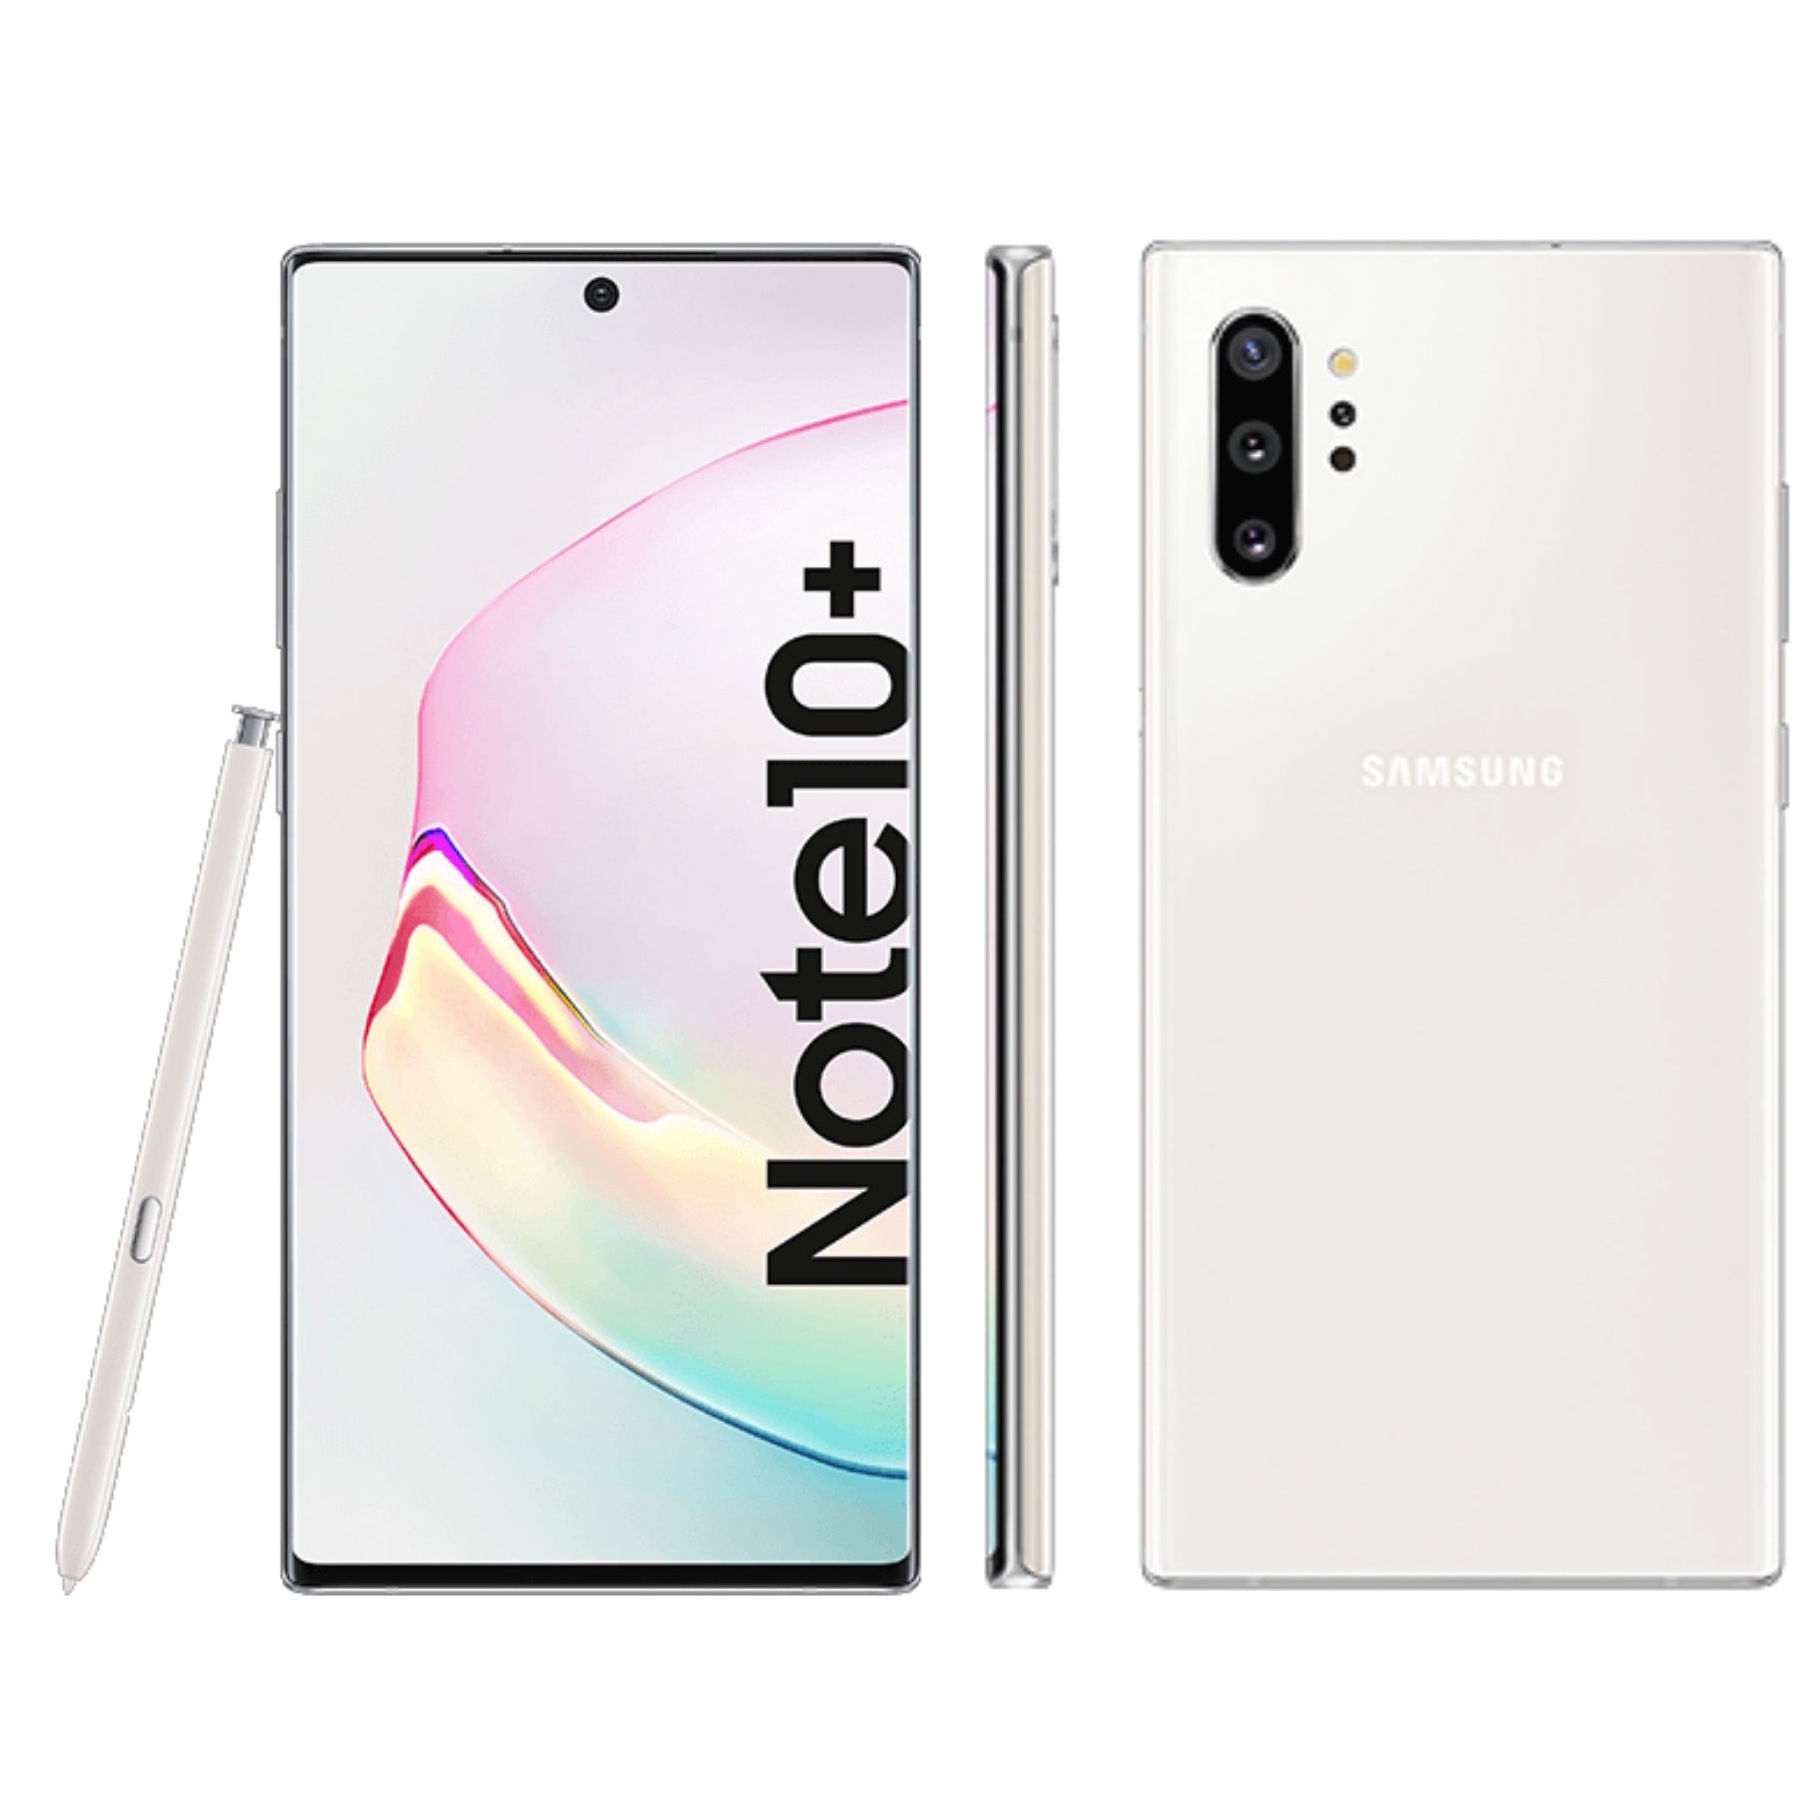 Note 10 12 256gb